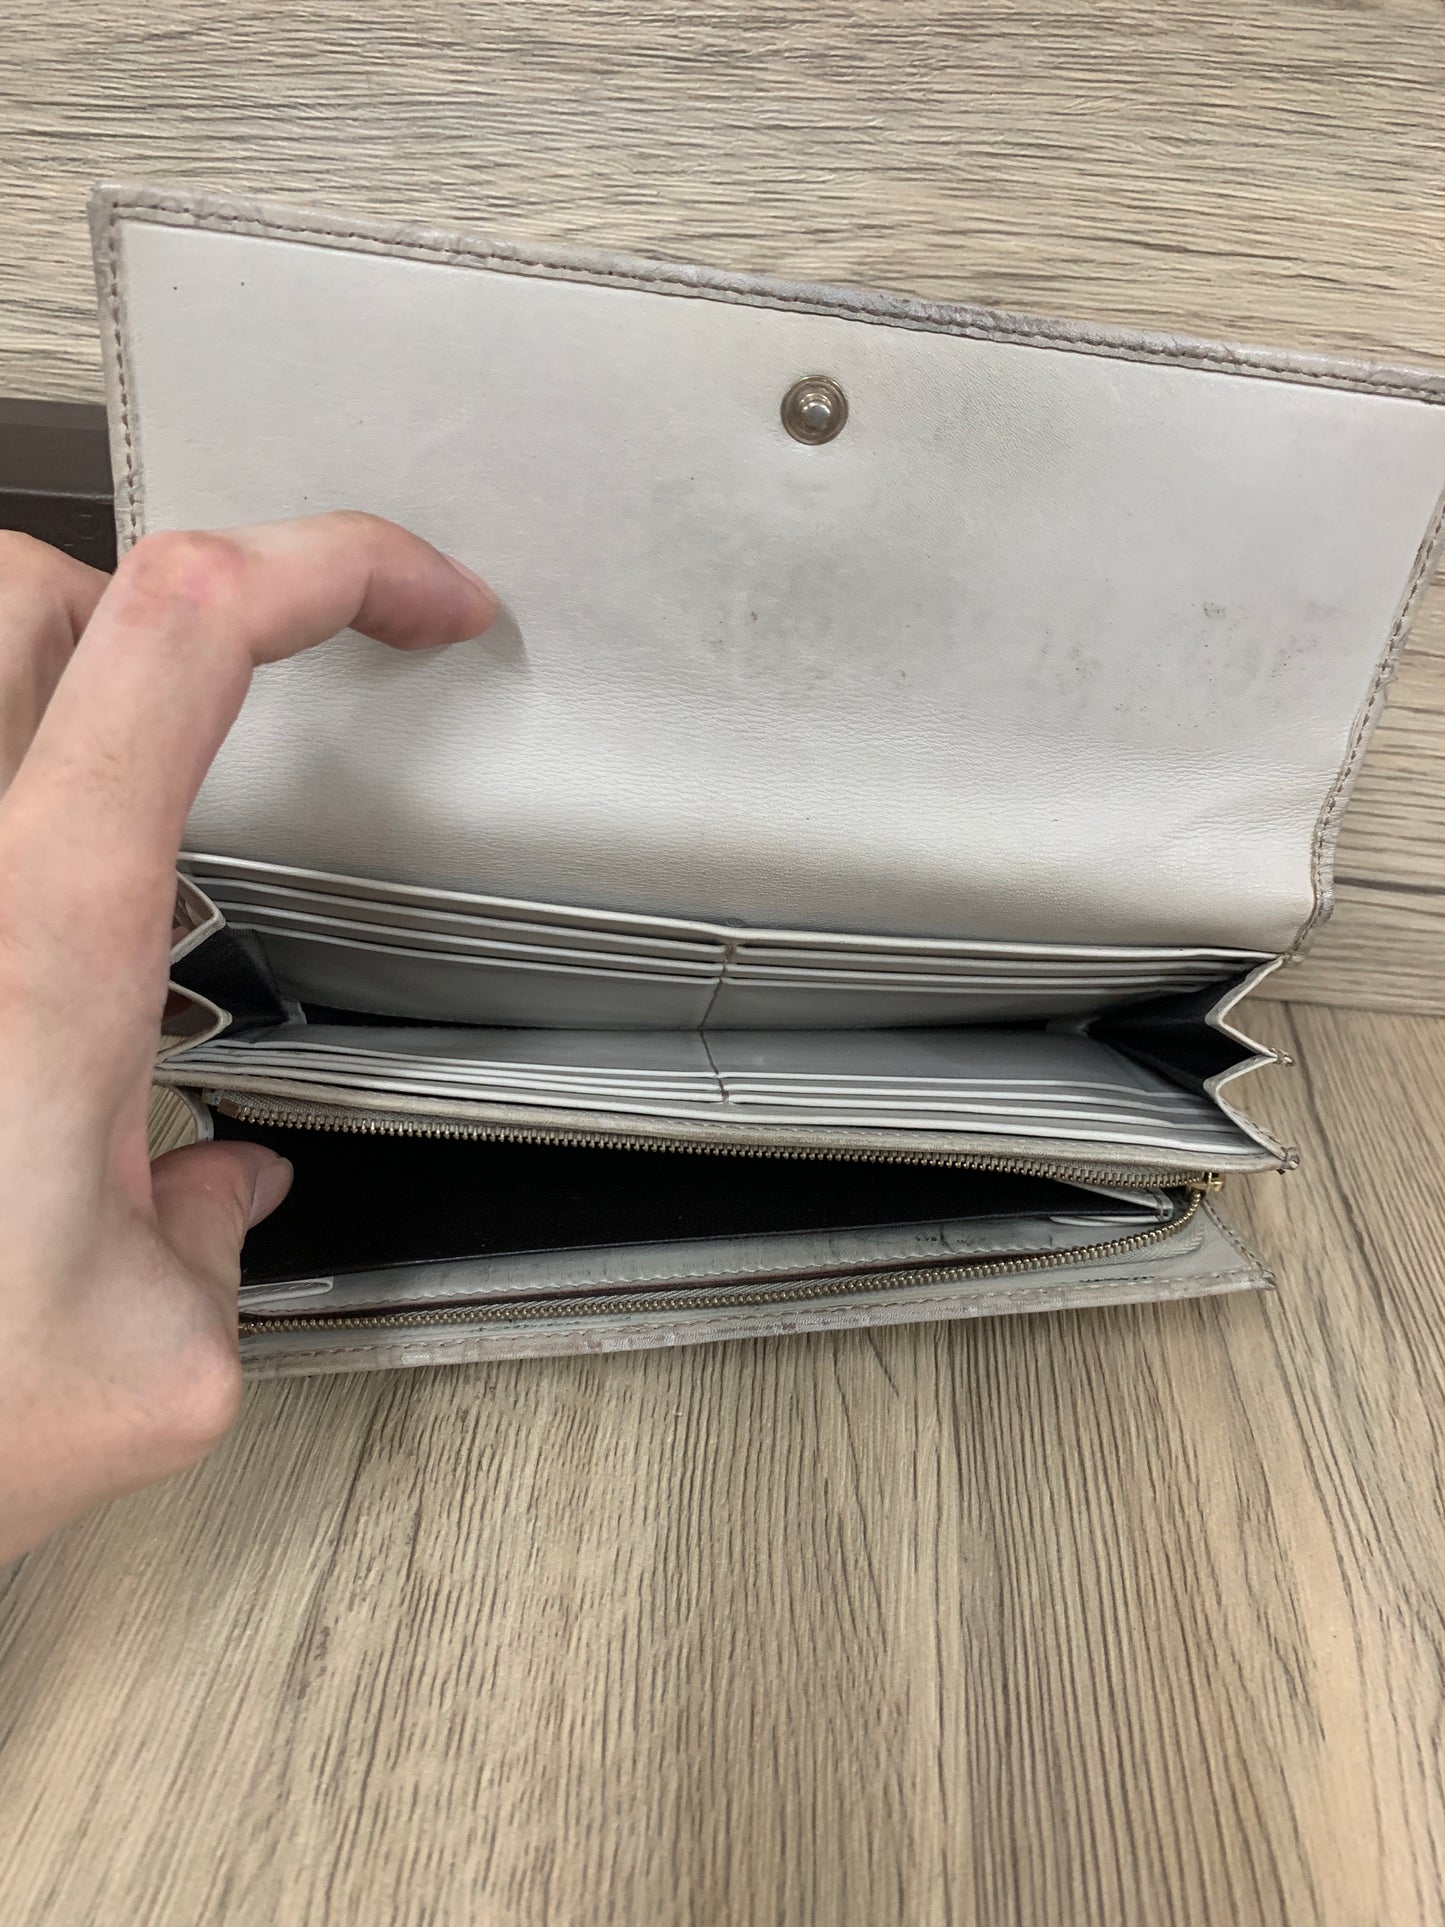 Authentic Gucci Long Wallet with coins bag grey - 24AUG22